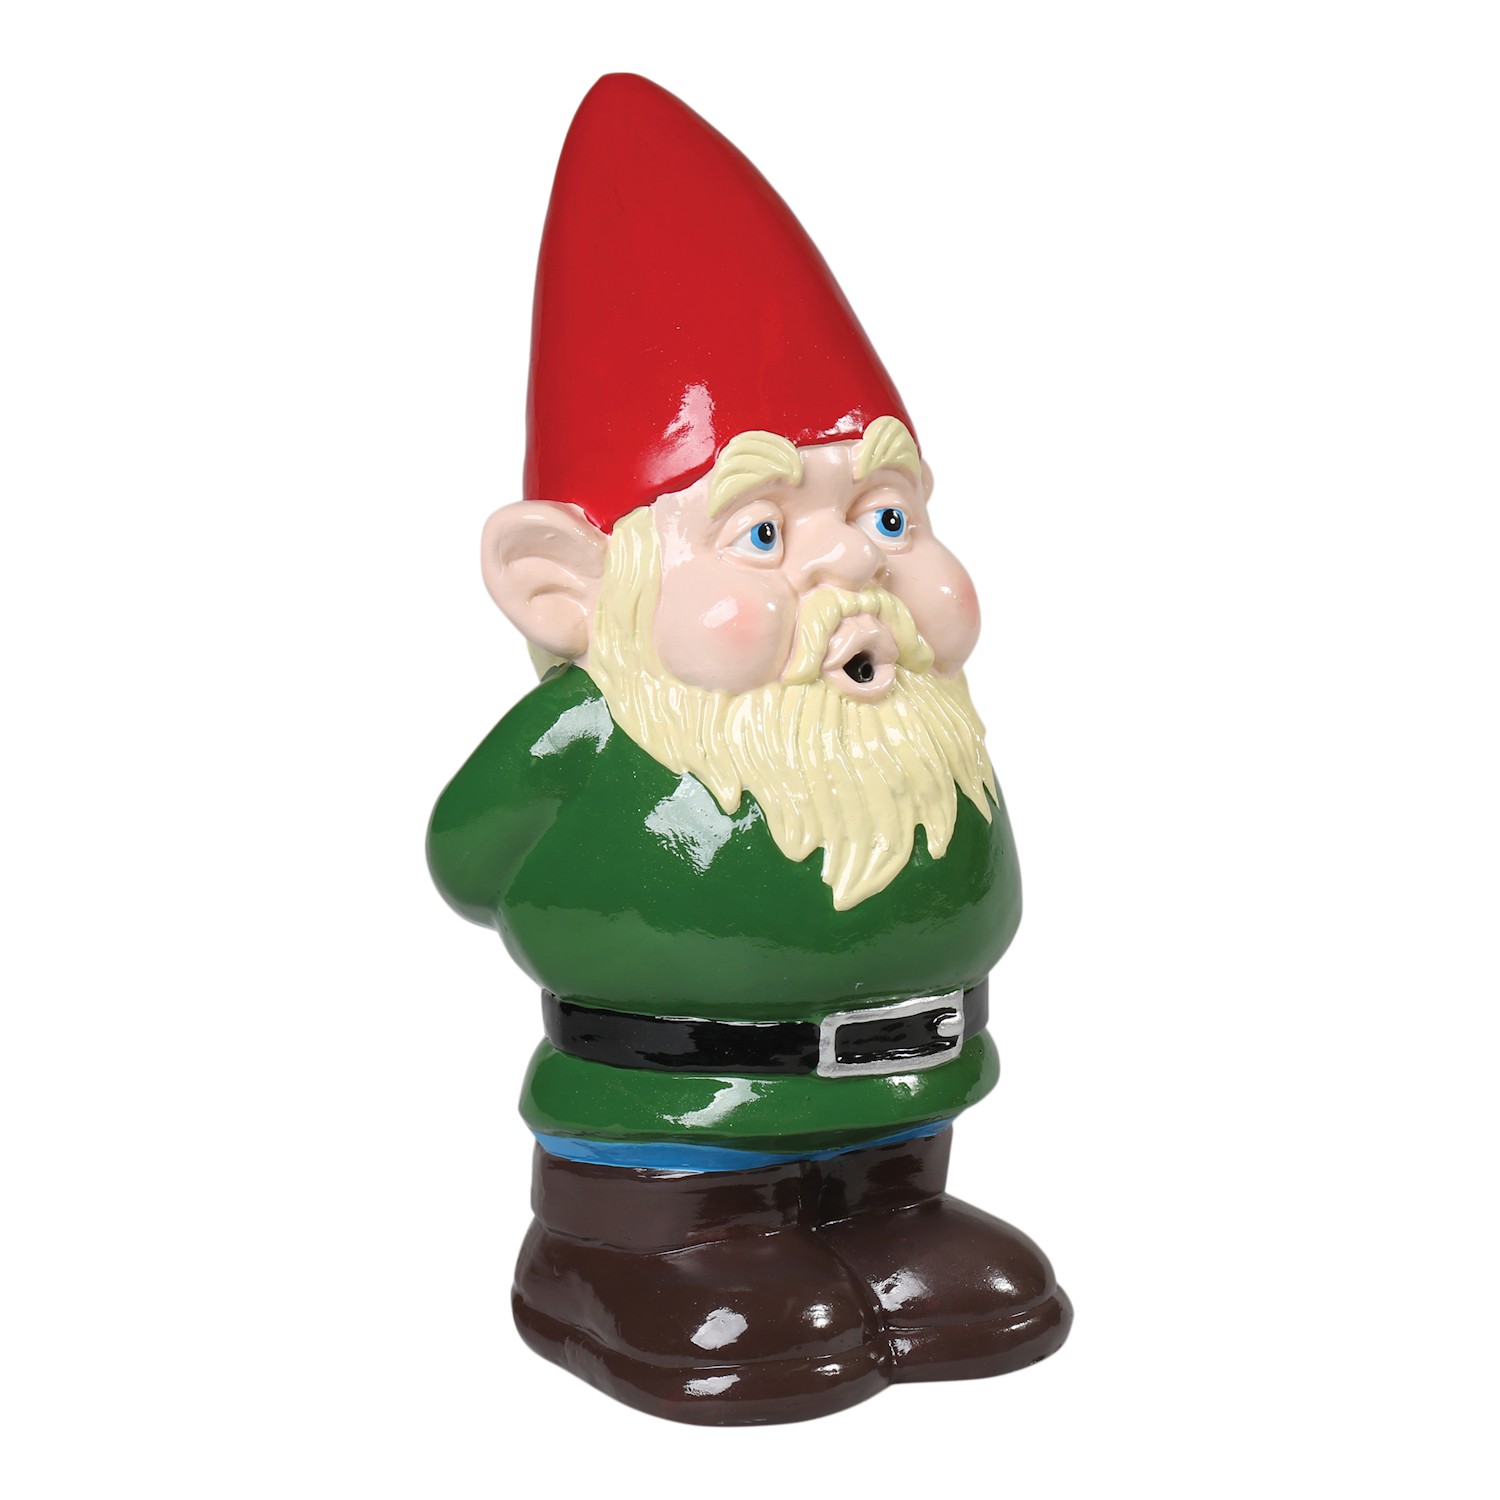 What On Earth Whistling Garden Gnome - Motion Activated Sound Outdoor